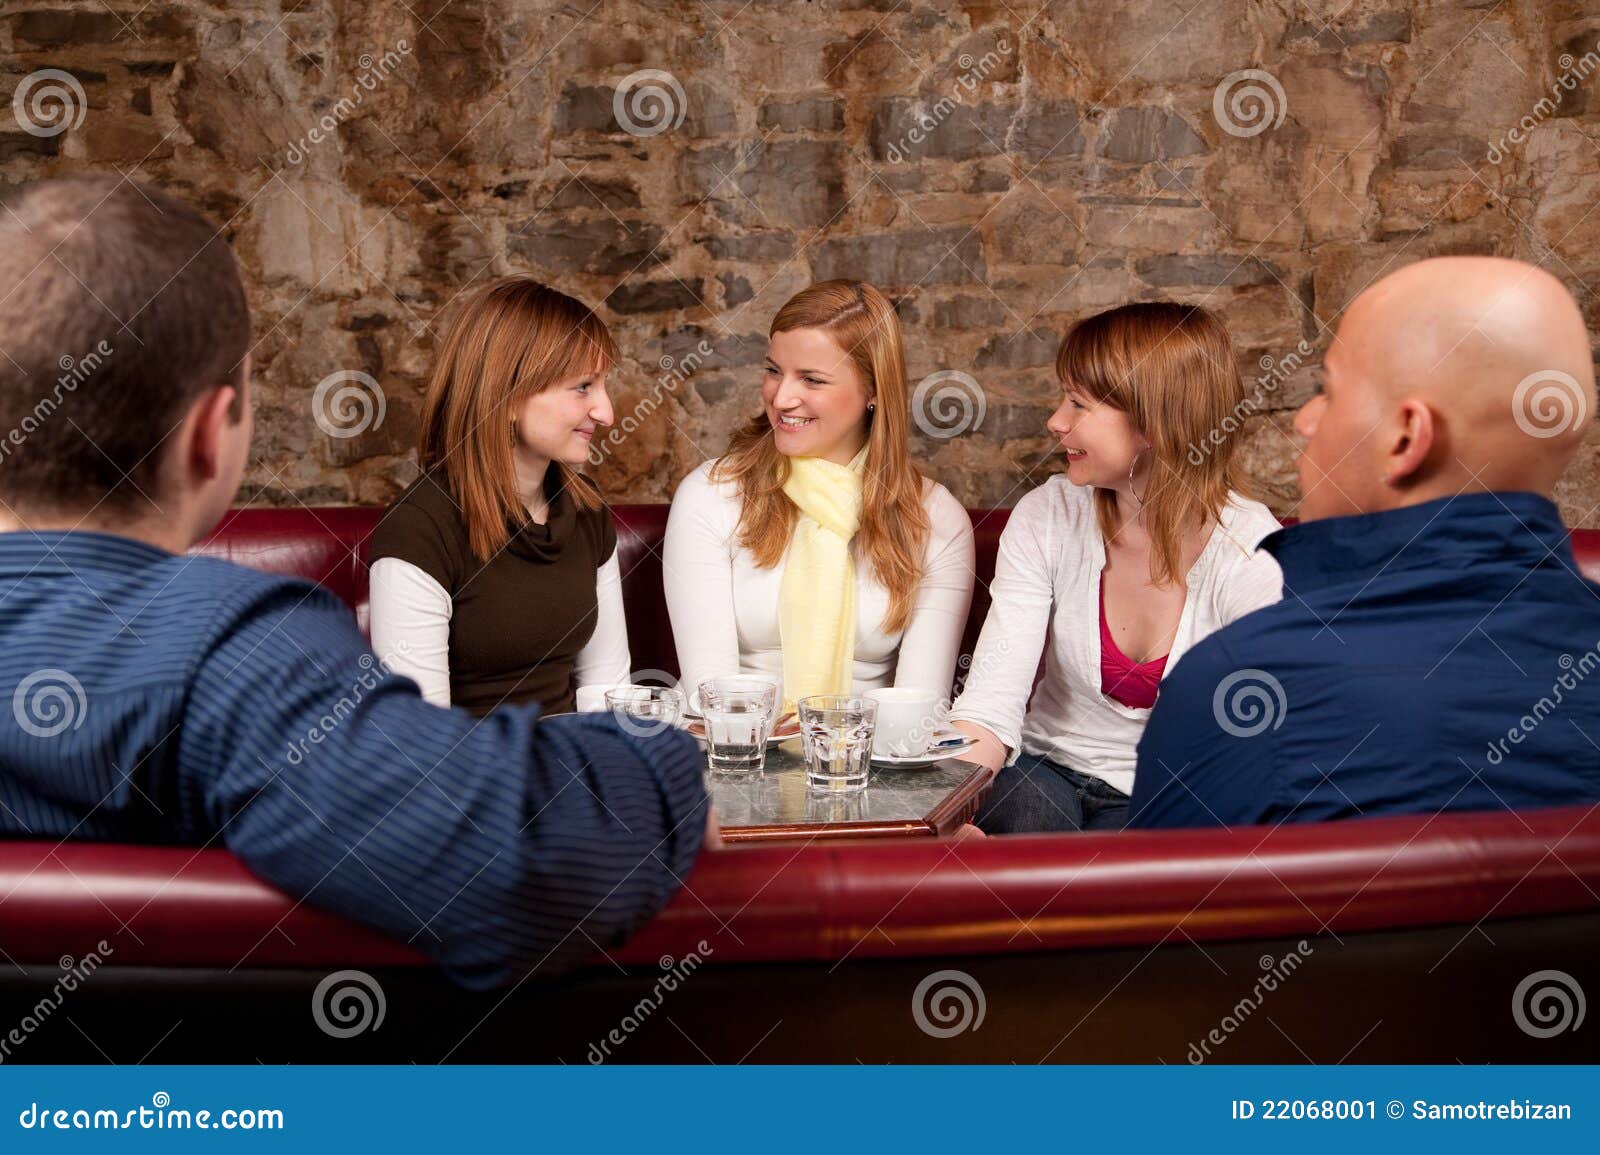 Happy People Drinking Coffee Stock Image Image 22068001